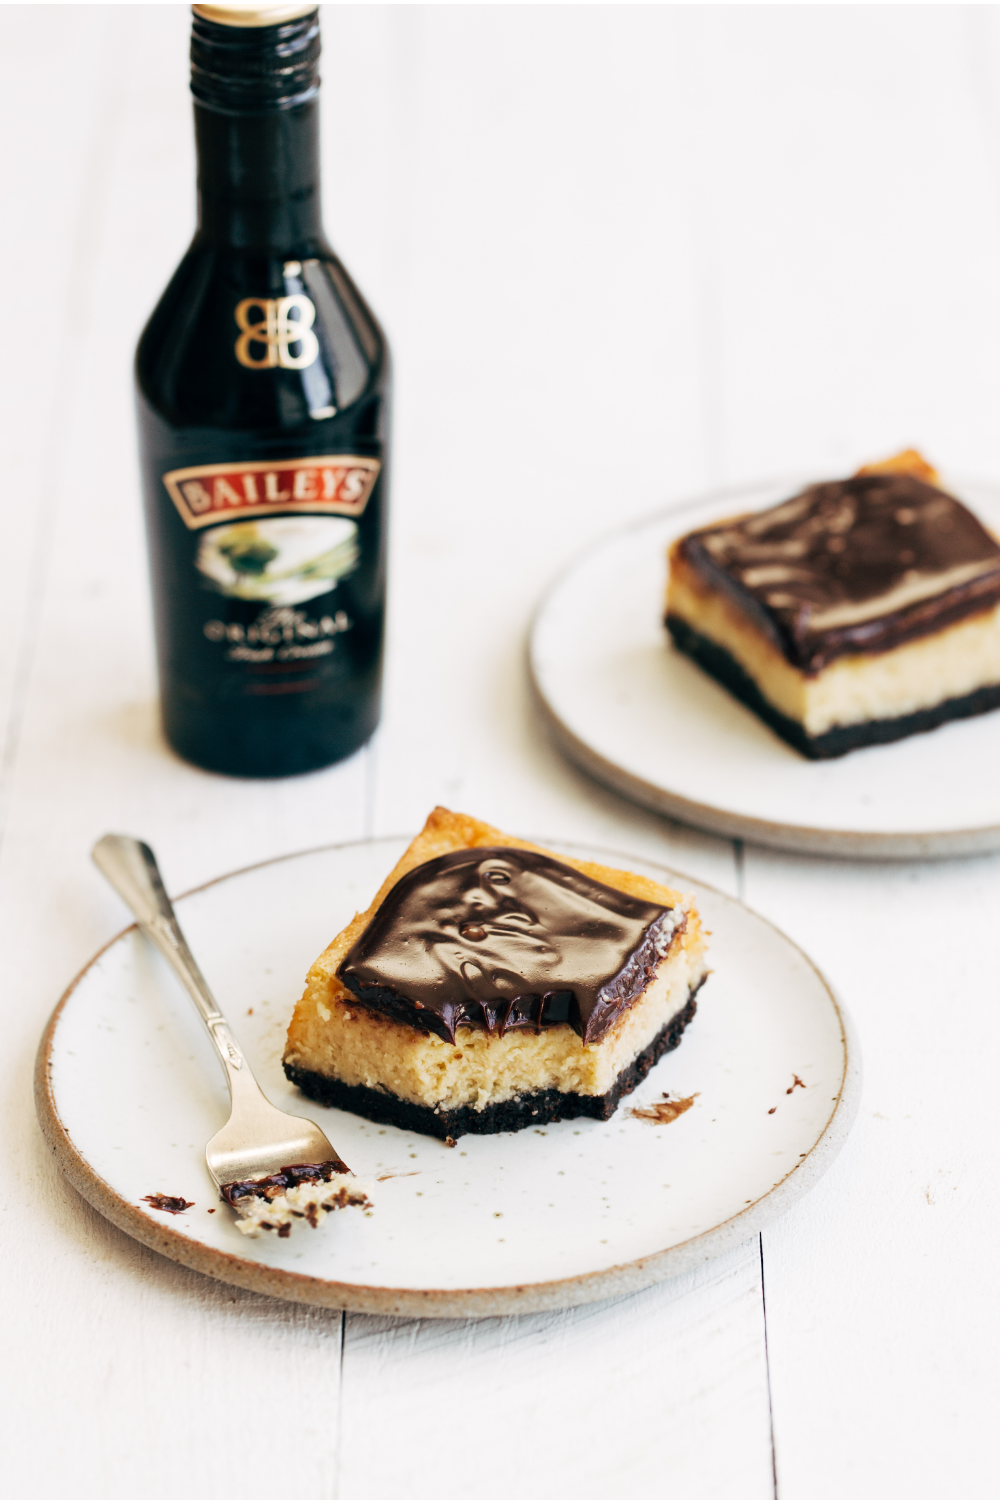 a bottle of Bailey's Irish Cream behind a couple slices of cheesecake bars on plates, ready to serve.